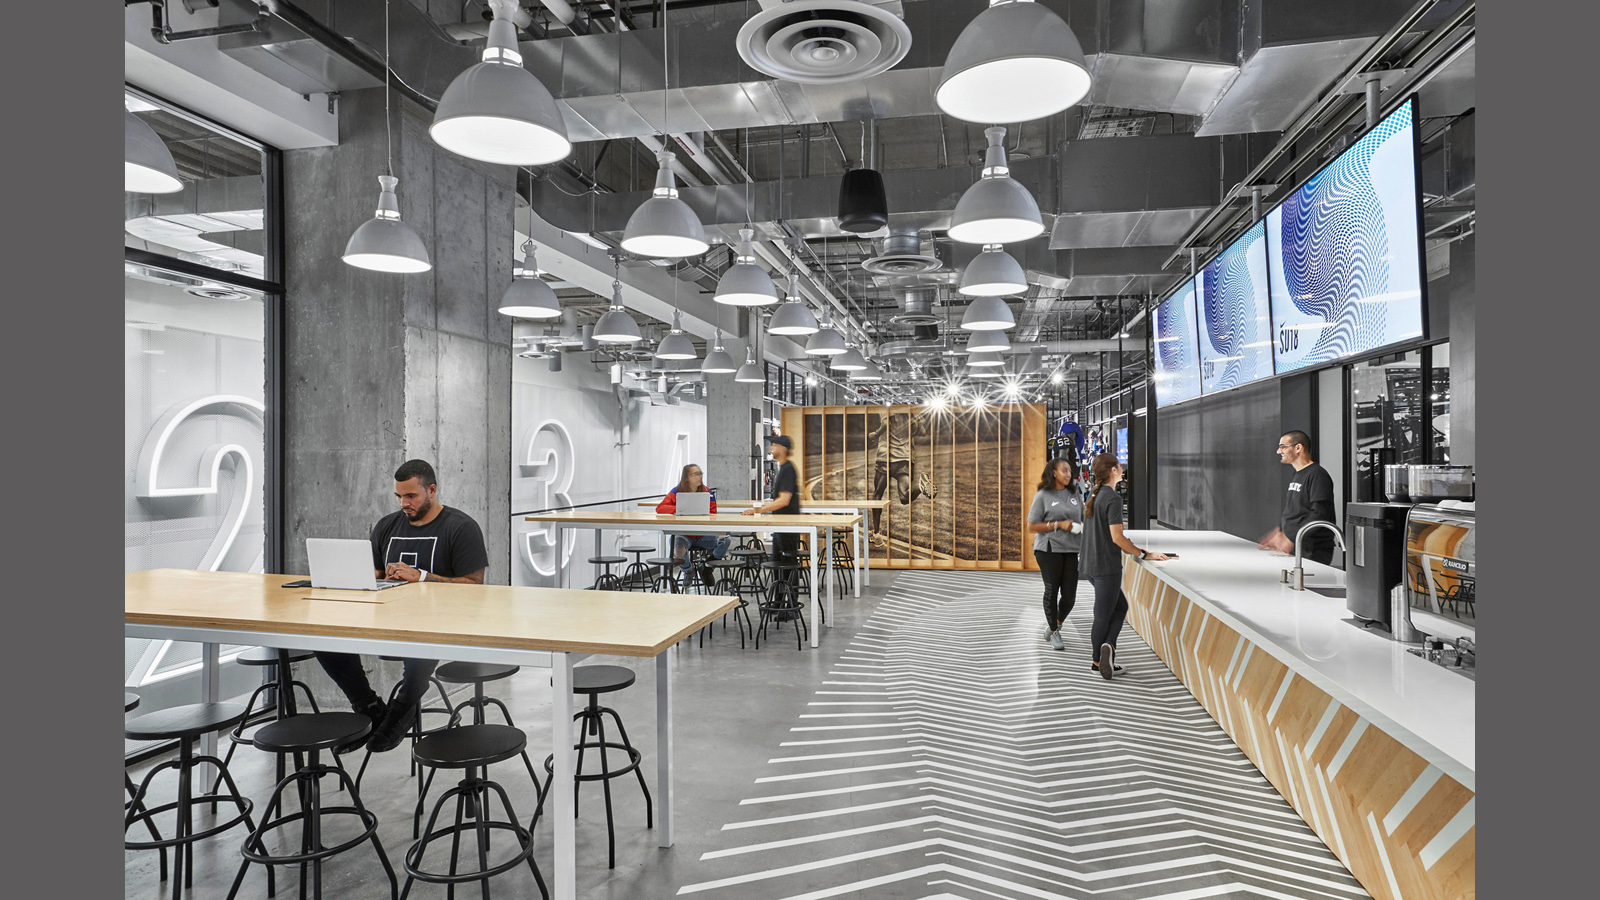 Nike Nyc Headquarters Interior, coffee bar with tables